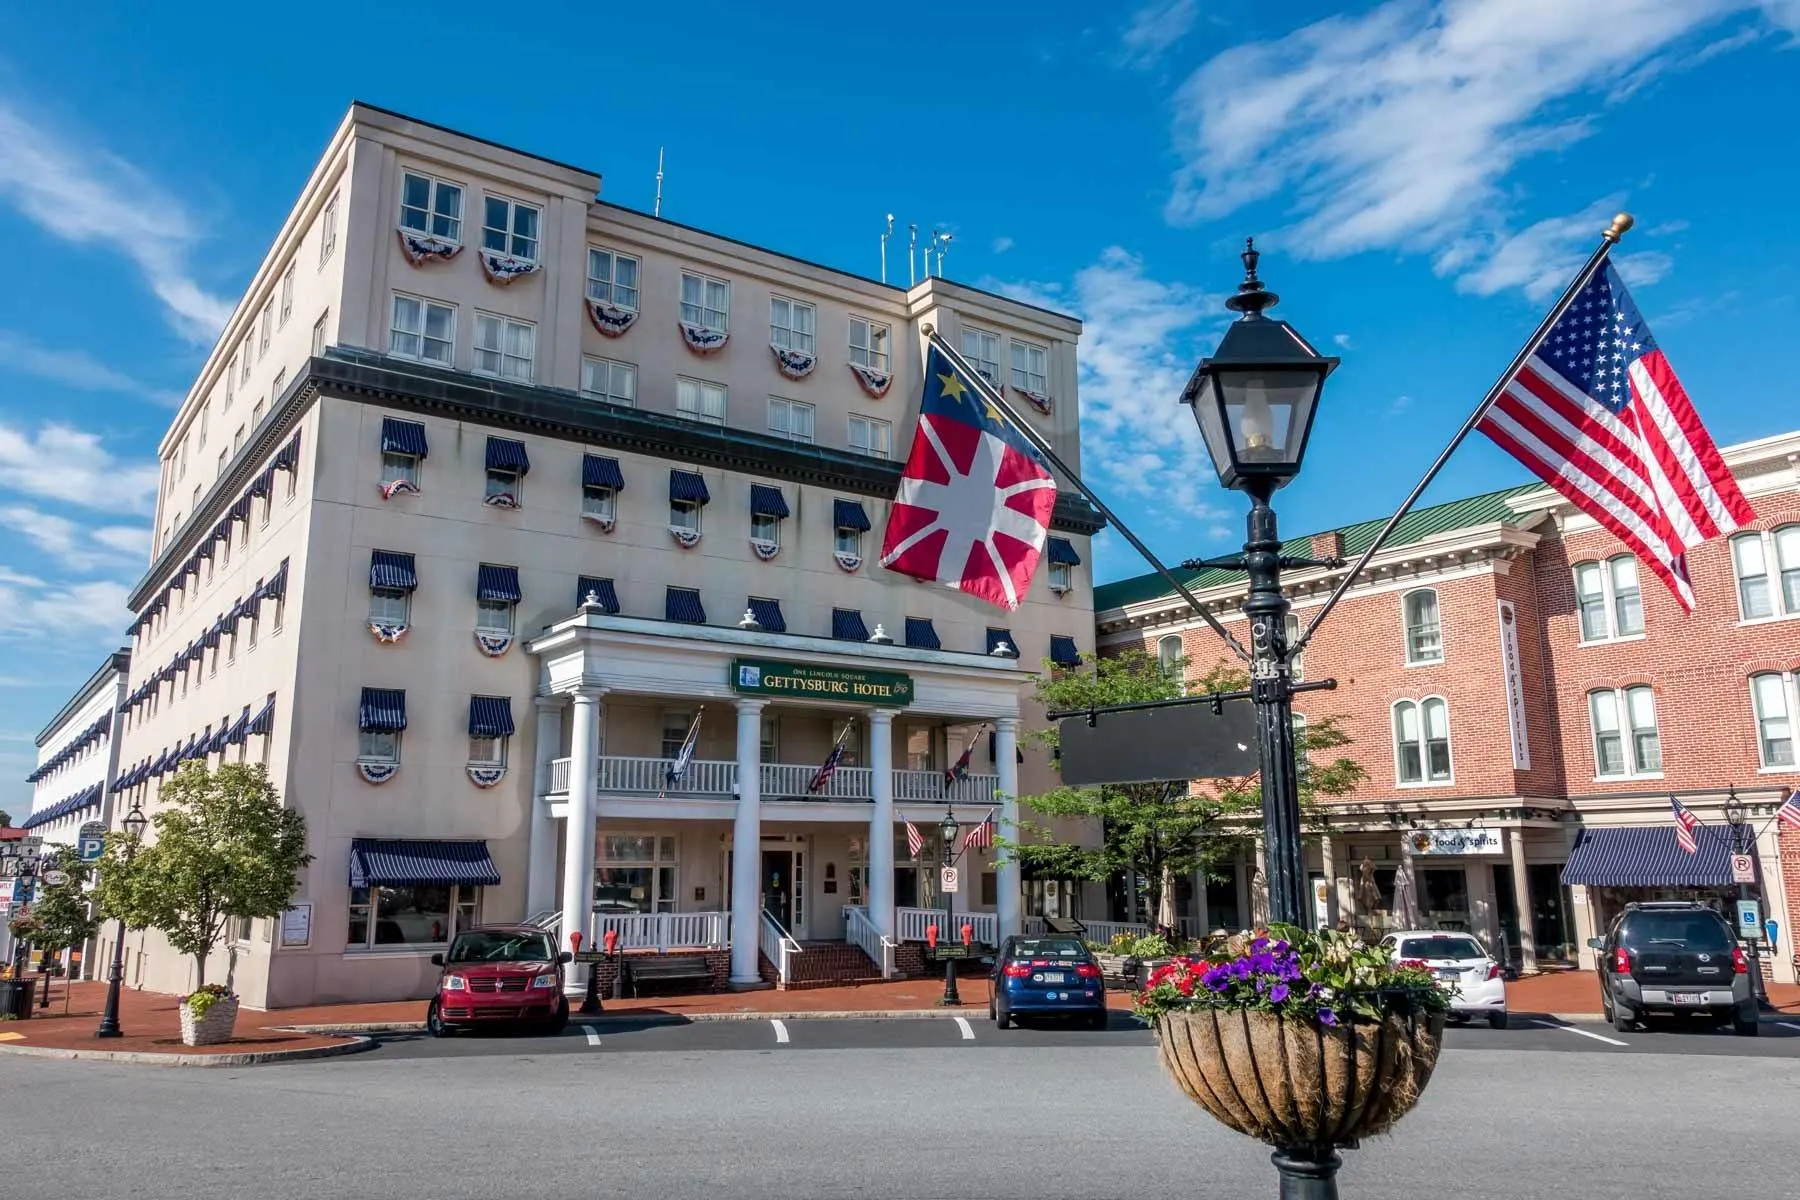 Flags flying in front of a 6-story building with rows of windows and a sign: Gettysburg Hotel